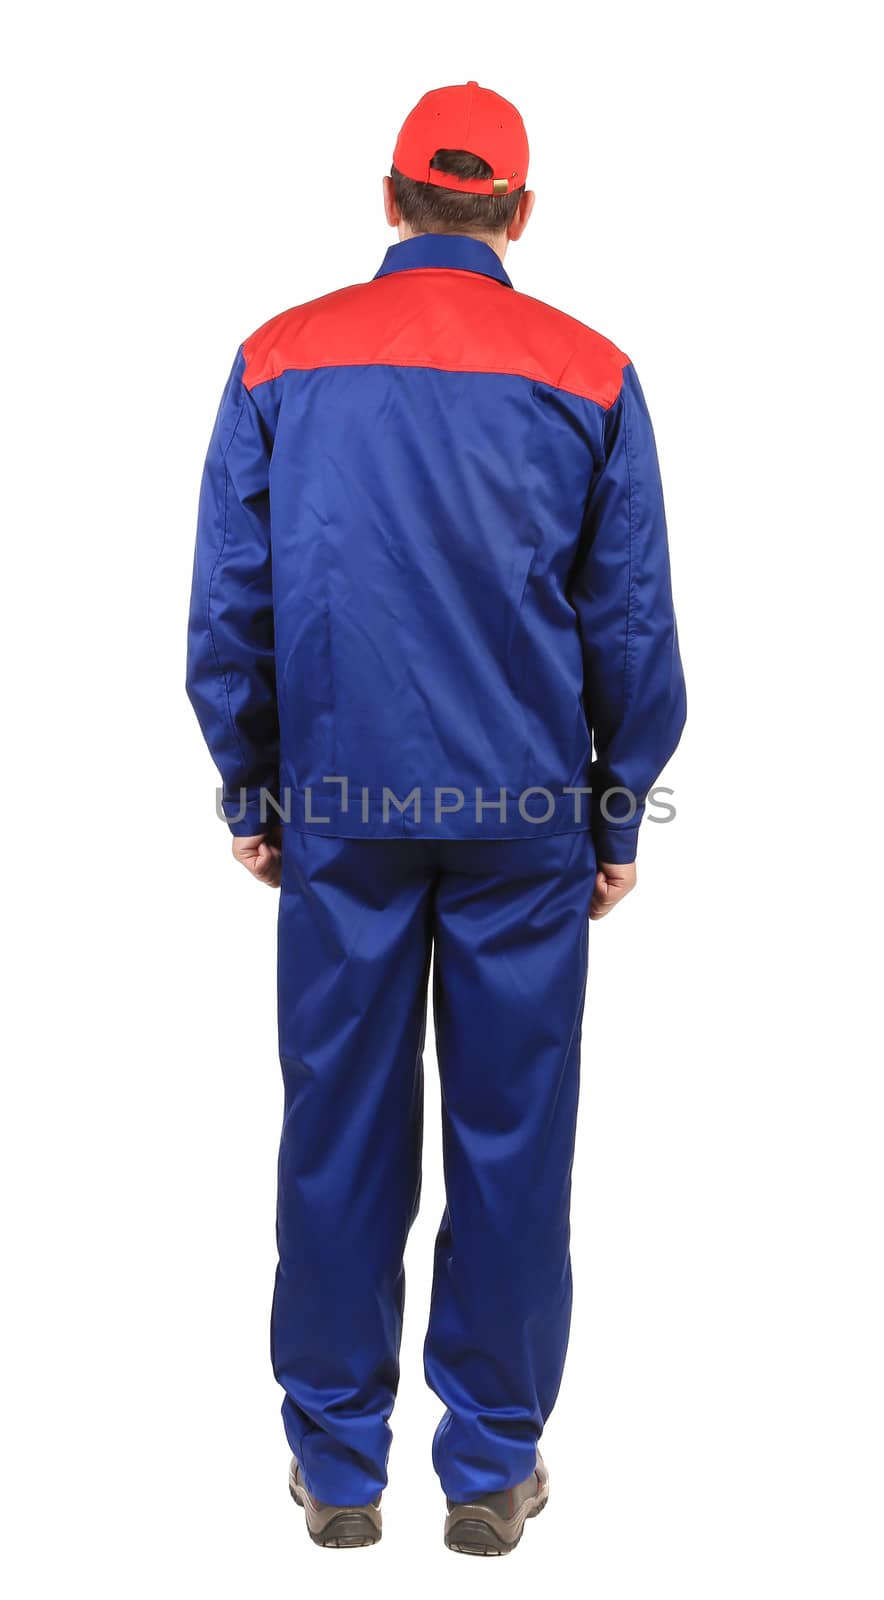 Man in blue and red overalls.Isolated on a white background